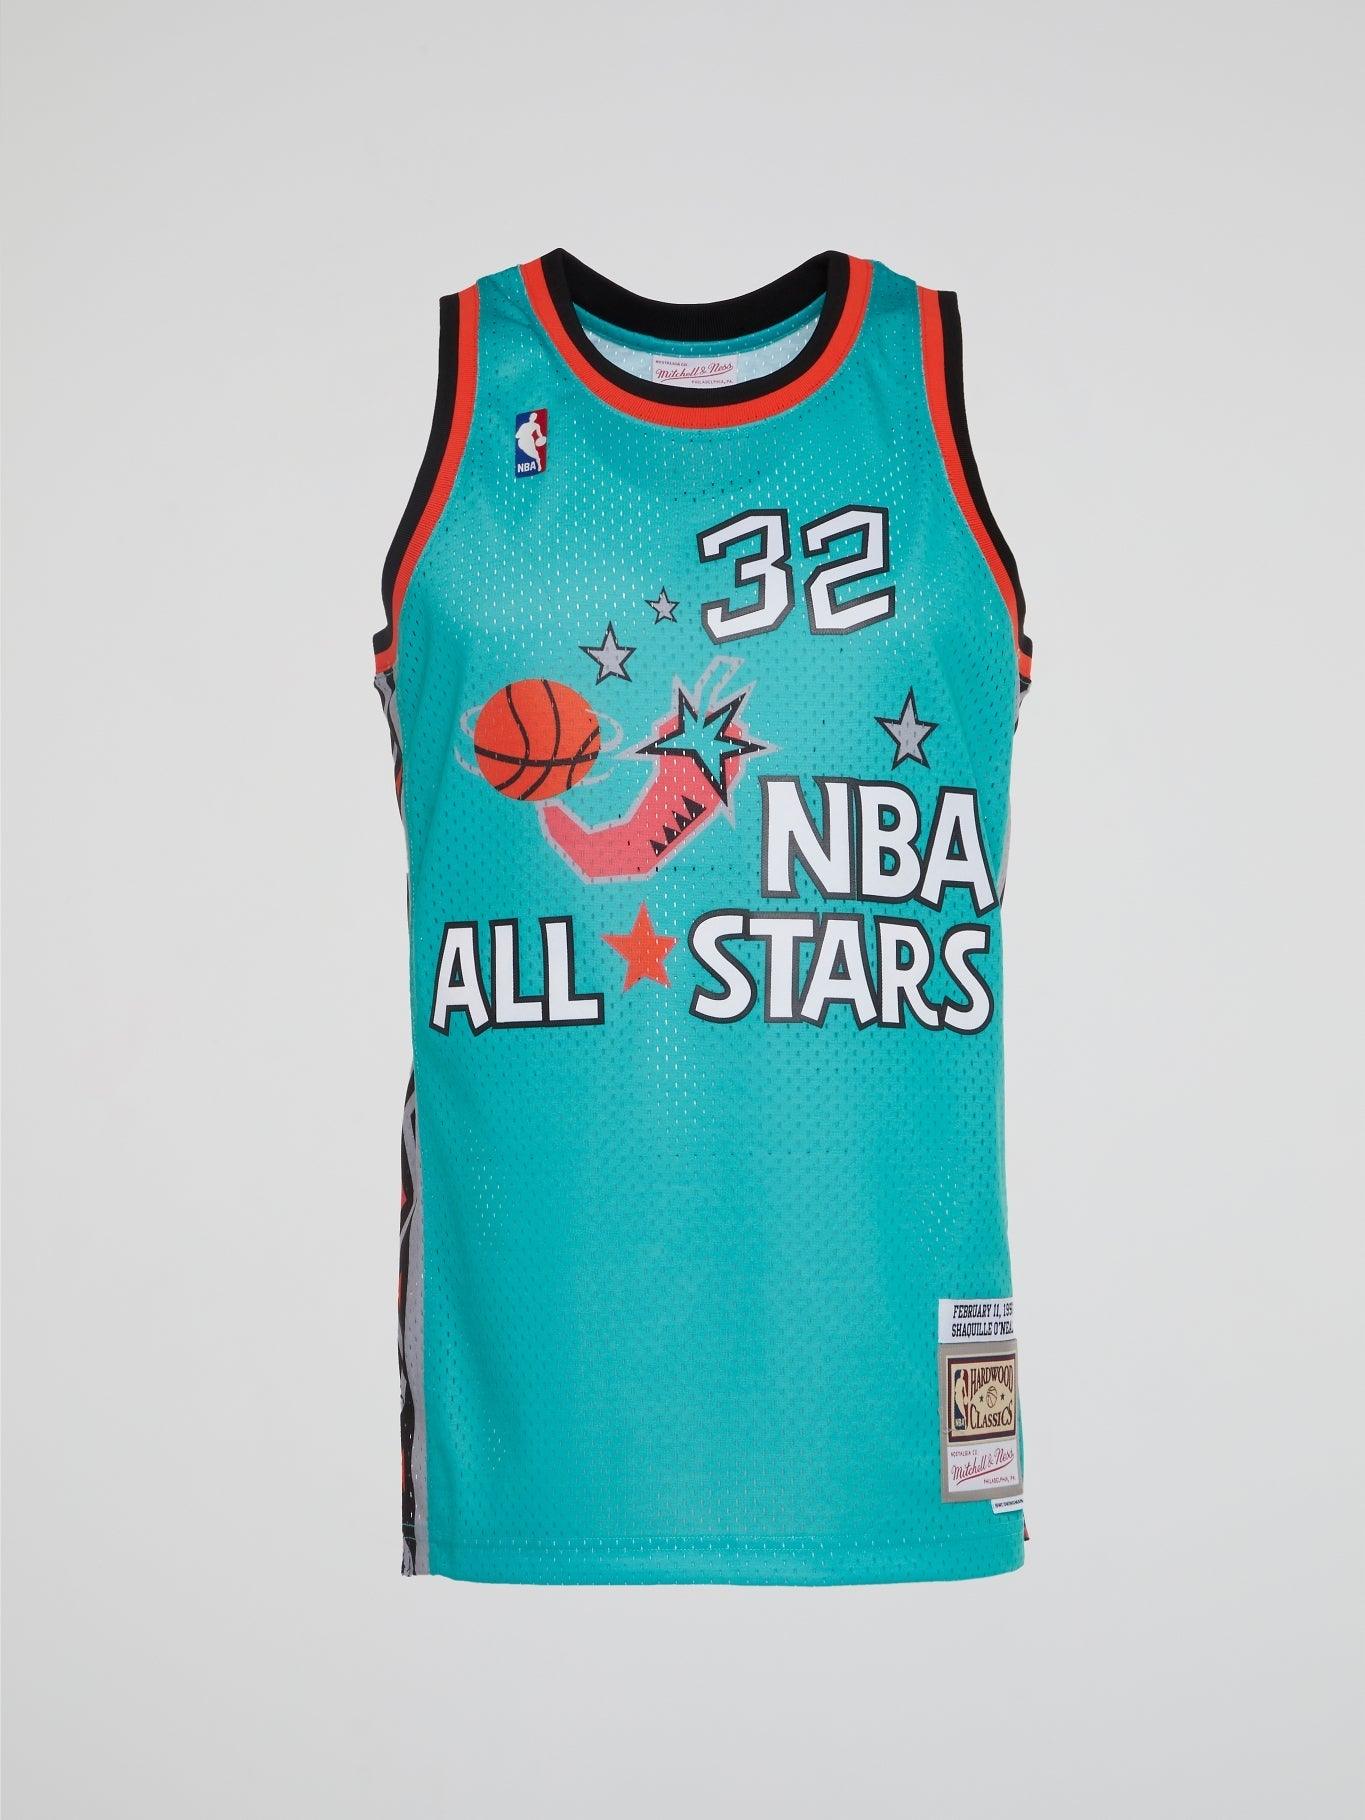 NBA Swingman Jersey All Star 96 Shaquille O\'Neal - Teal - B-Hype Society